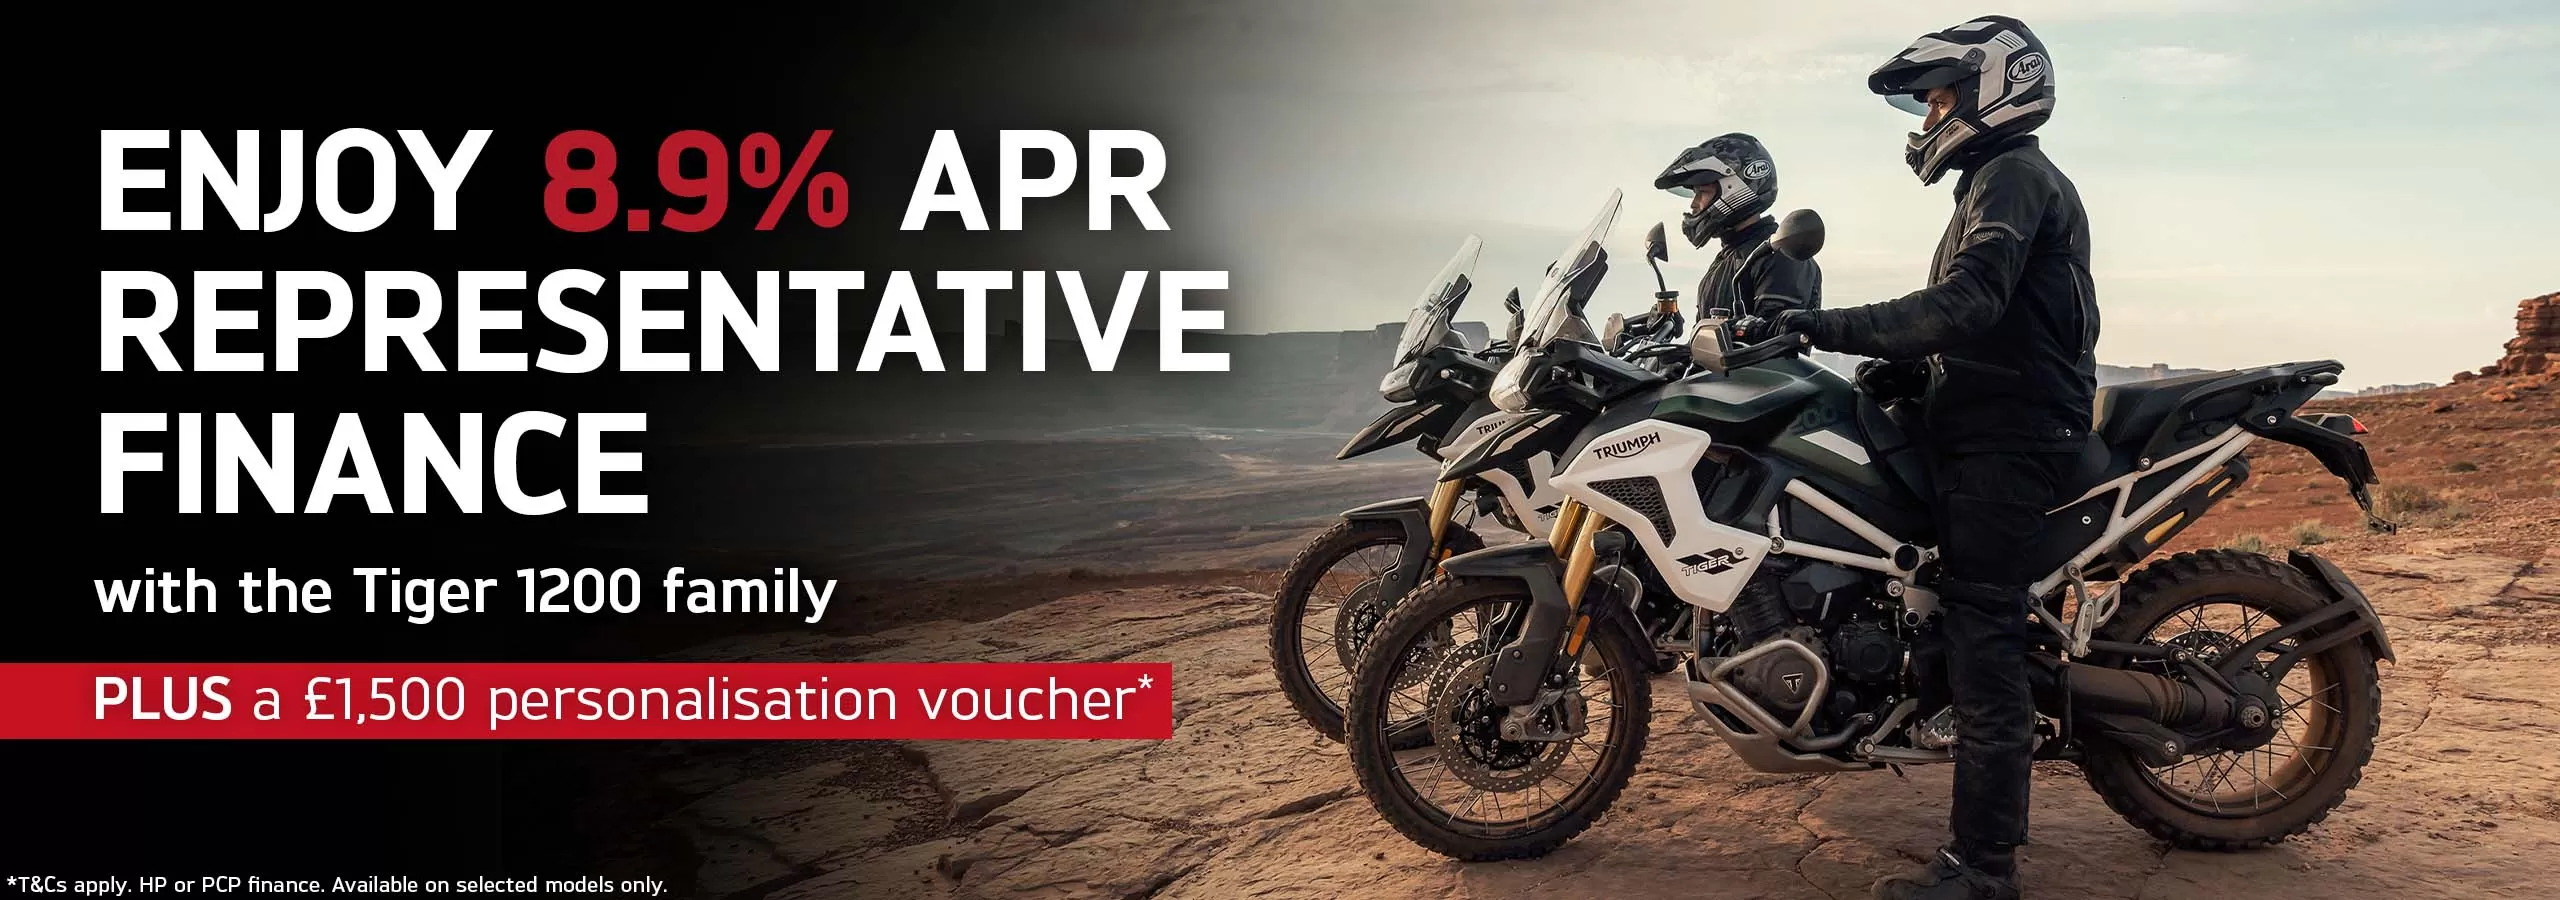 We have a new Laguna Exclusive Offer on all of the Tiger 1200 models: Enjoy a £250 voucher to spend on 1 of 3 fantastic options, plus 8.9% APR representative HP/PCP finance.